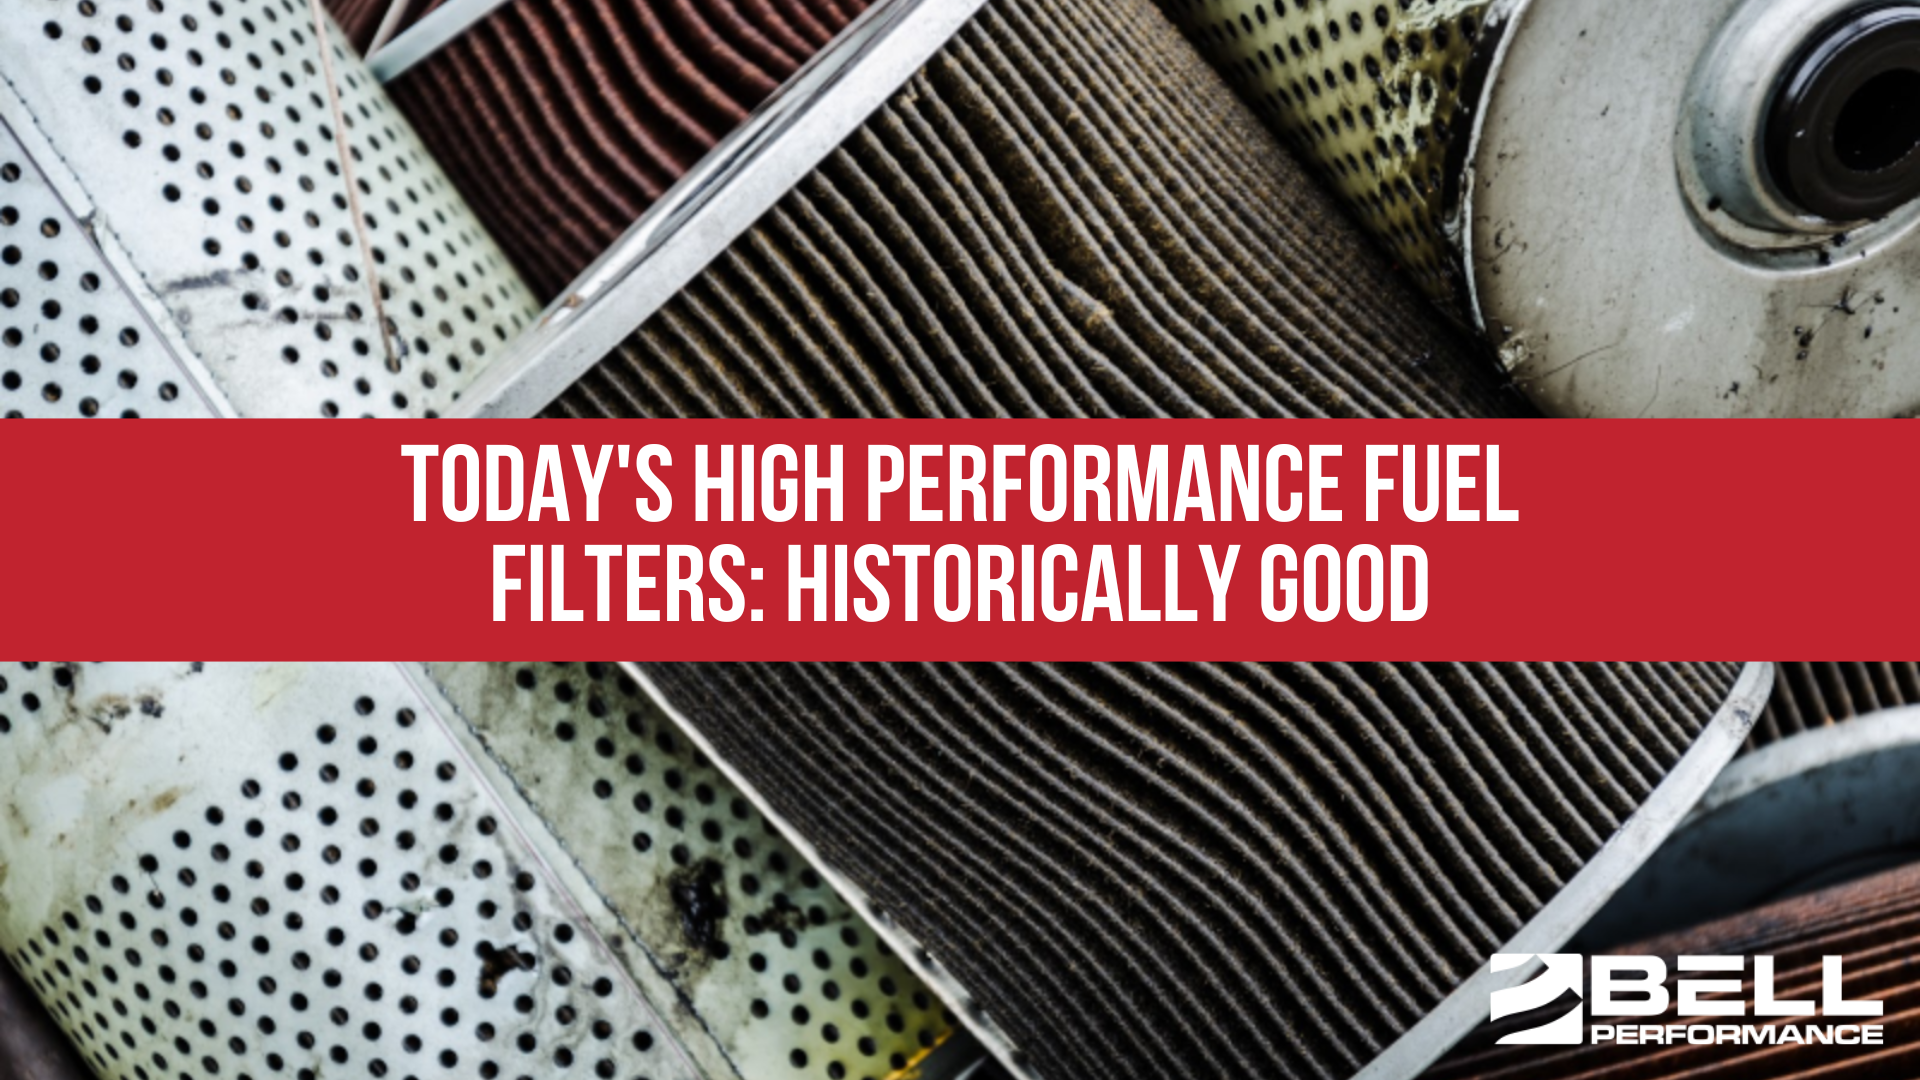 Today's High Performance Fuel Filters: Historically Good